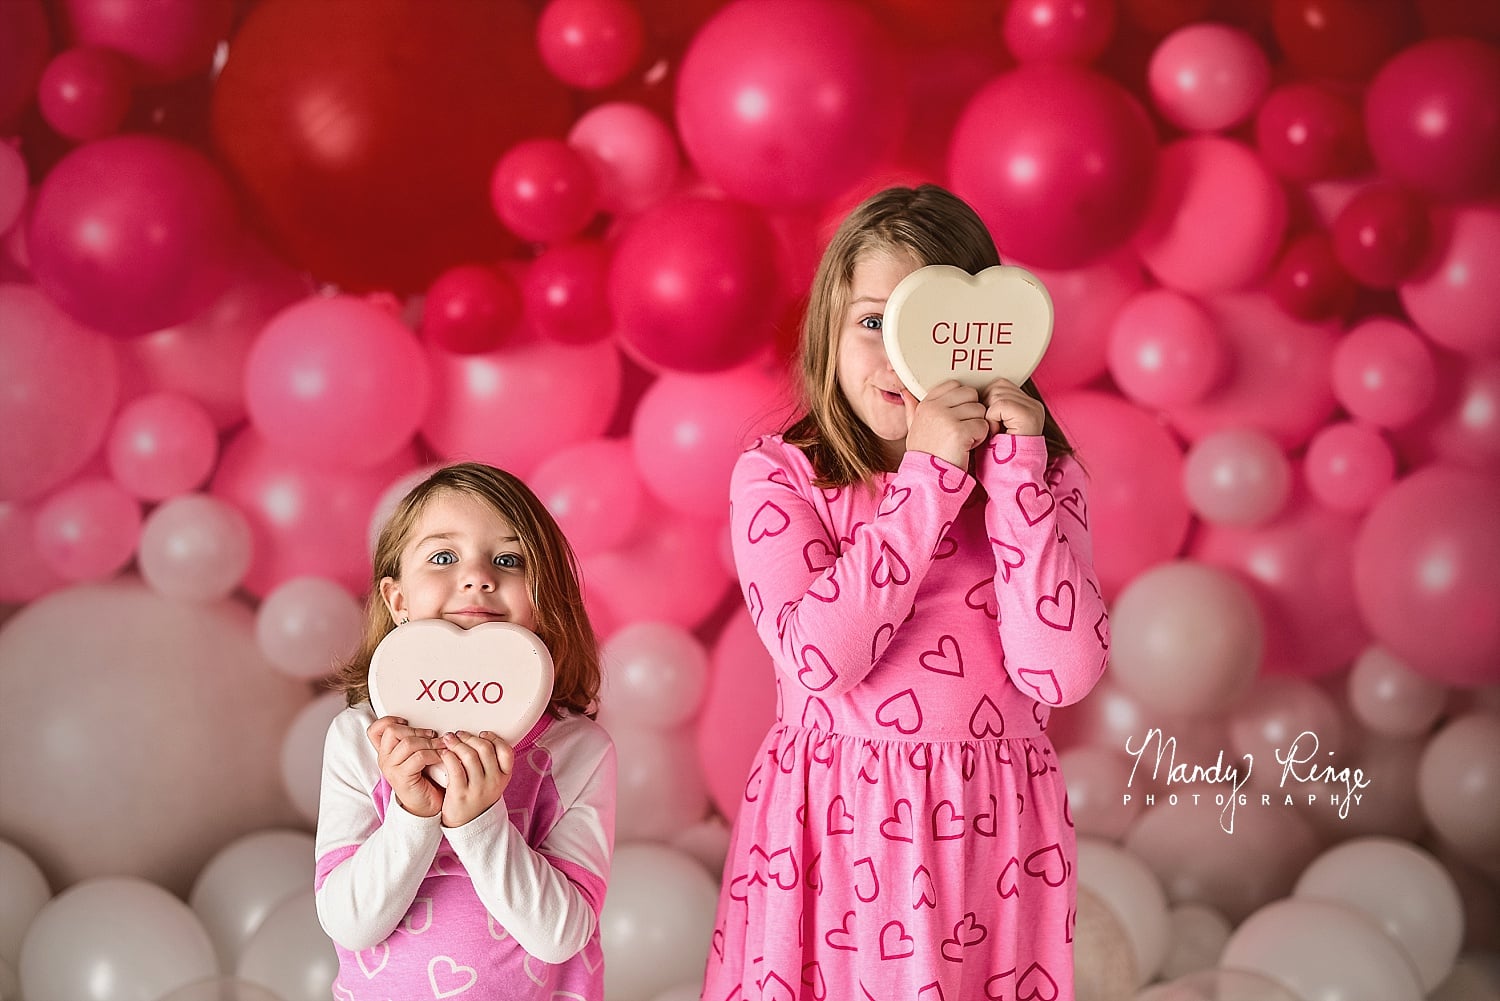 RTS Kate Red Balloon Wall Valentine's Day Birthday Cake Smash Party Backdrop for Photography Designed by Mandy Ringe Photography (US ONLY)